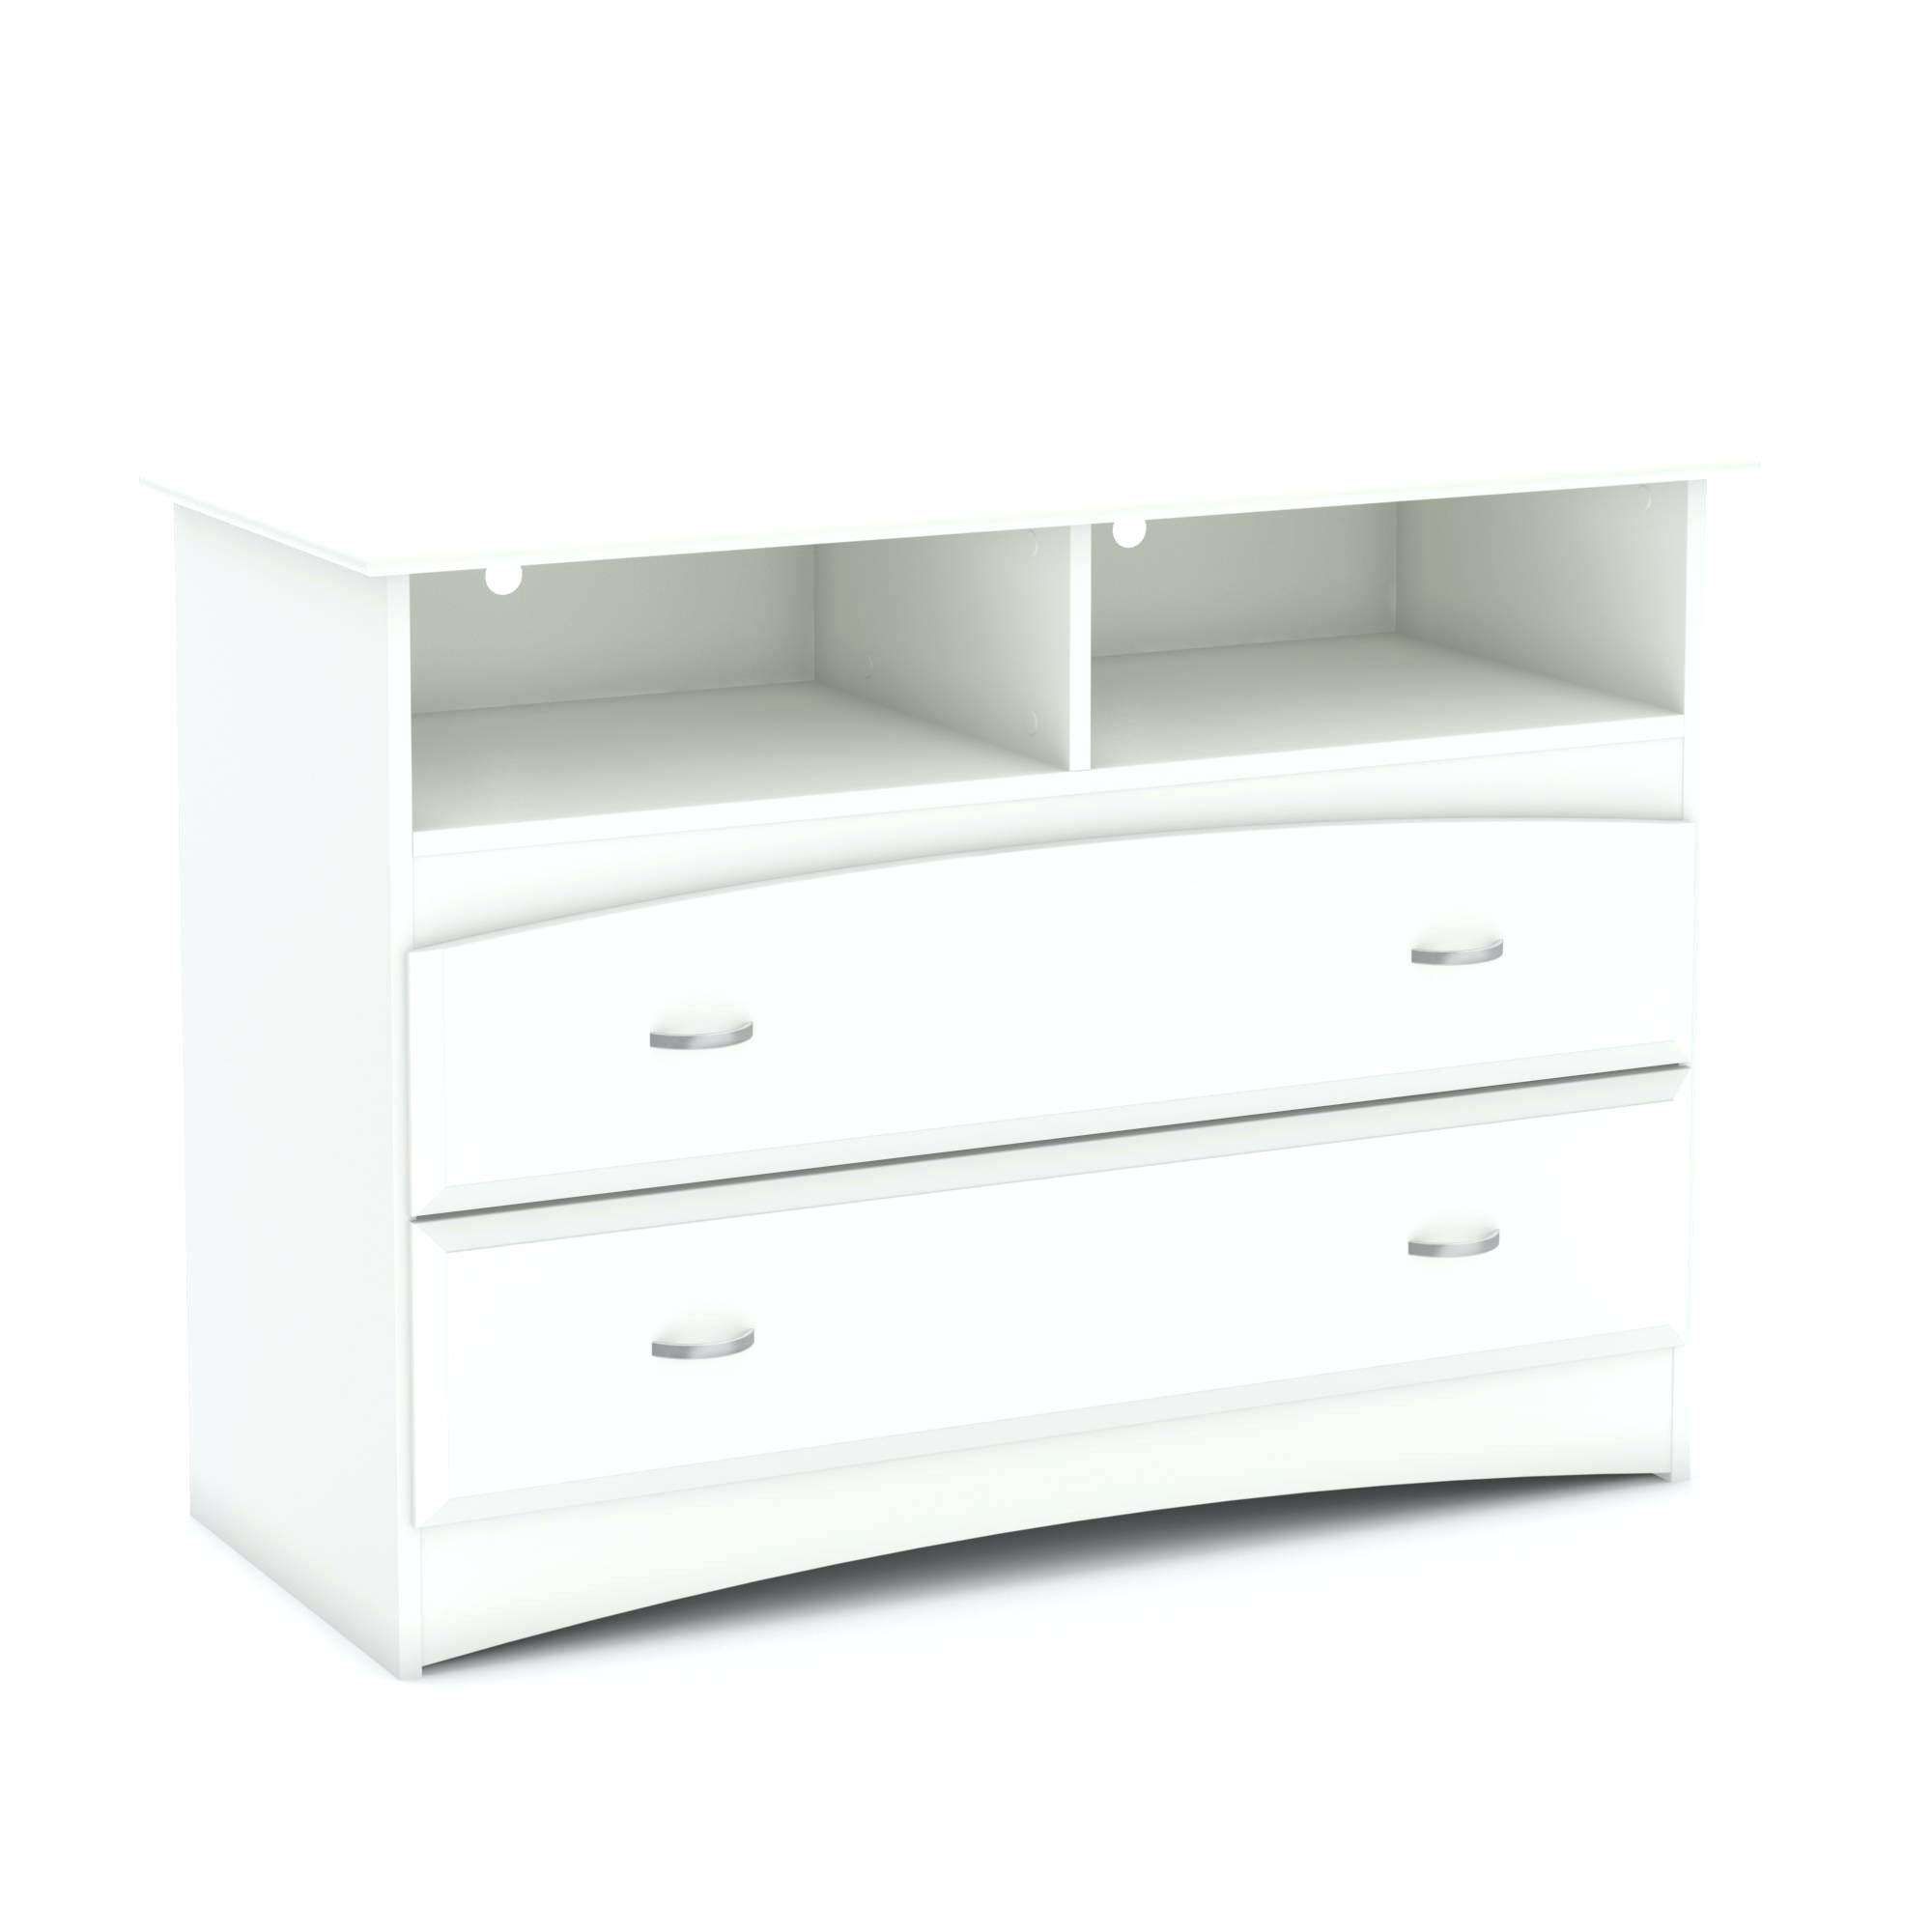 Tv Stand : Small White Tv Stand Furniture Australia Small White Tv Regarding Small White Tv Stands (View 10 of 15)